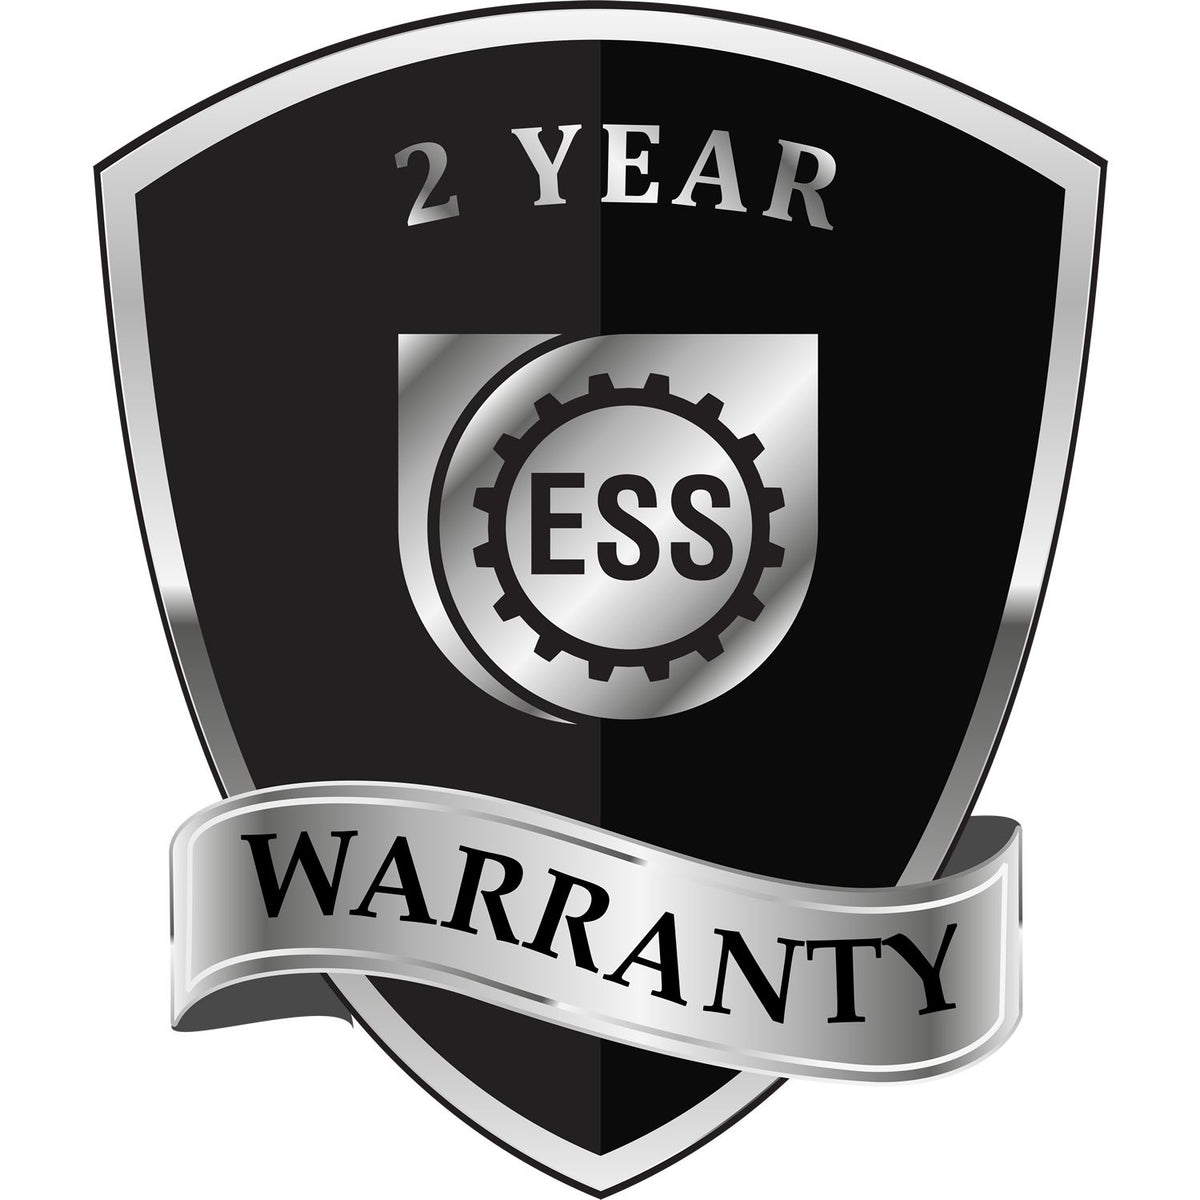 A badge or emblem showing a warranty icon for the Heavy Duty Cast Iron New Jersey Engineer Seal Embosser